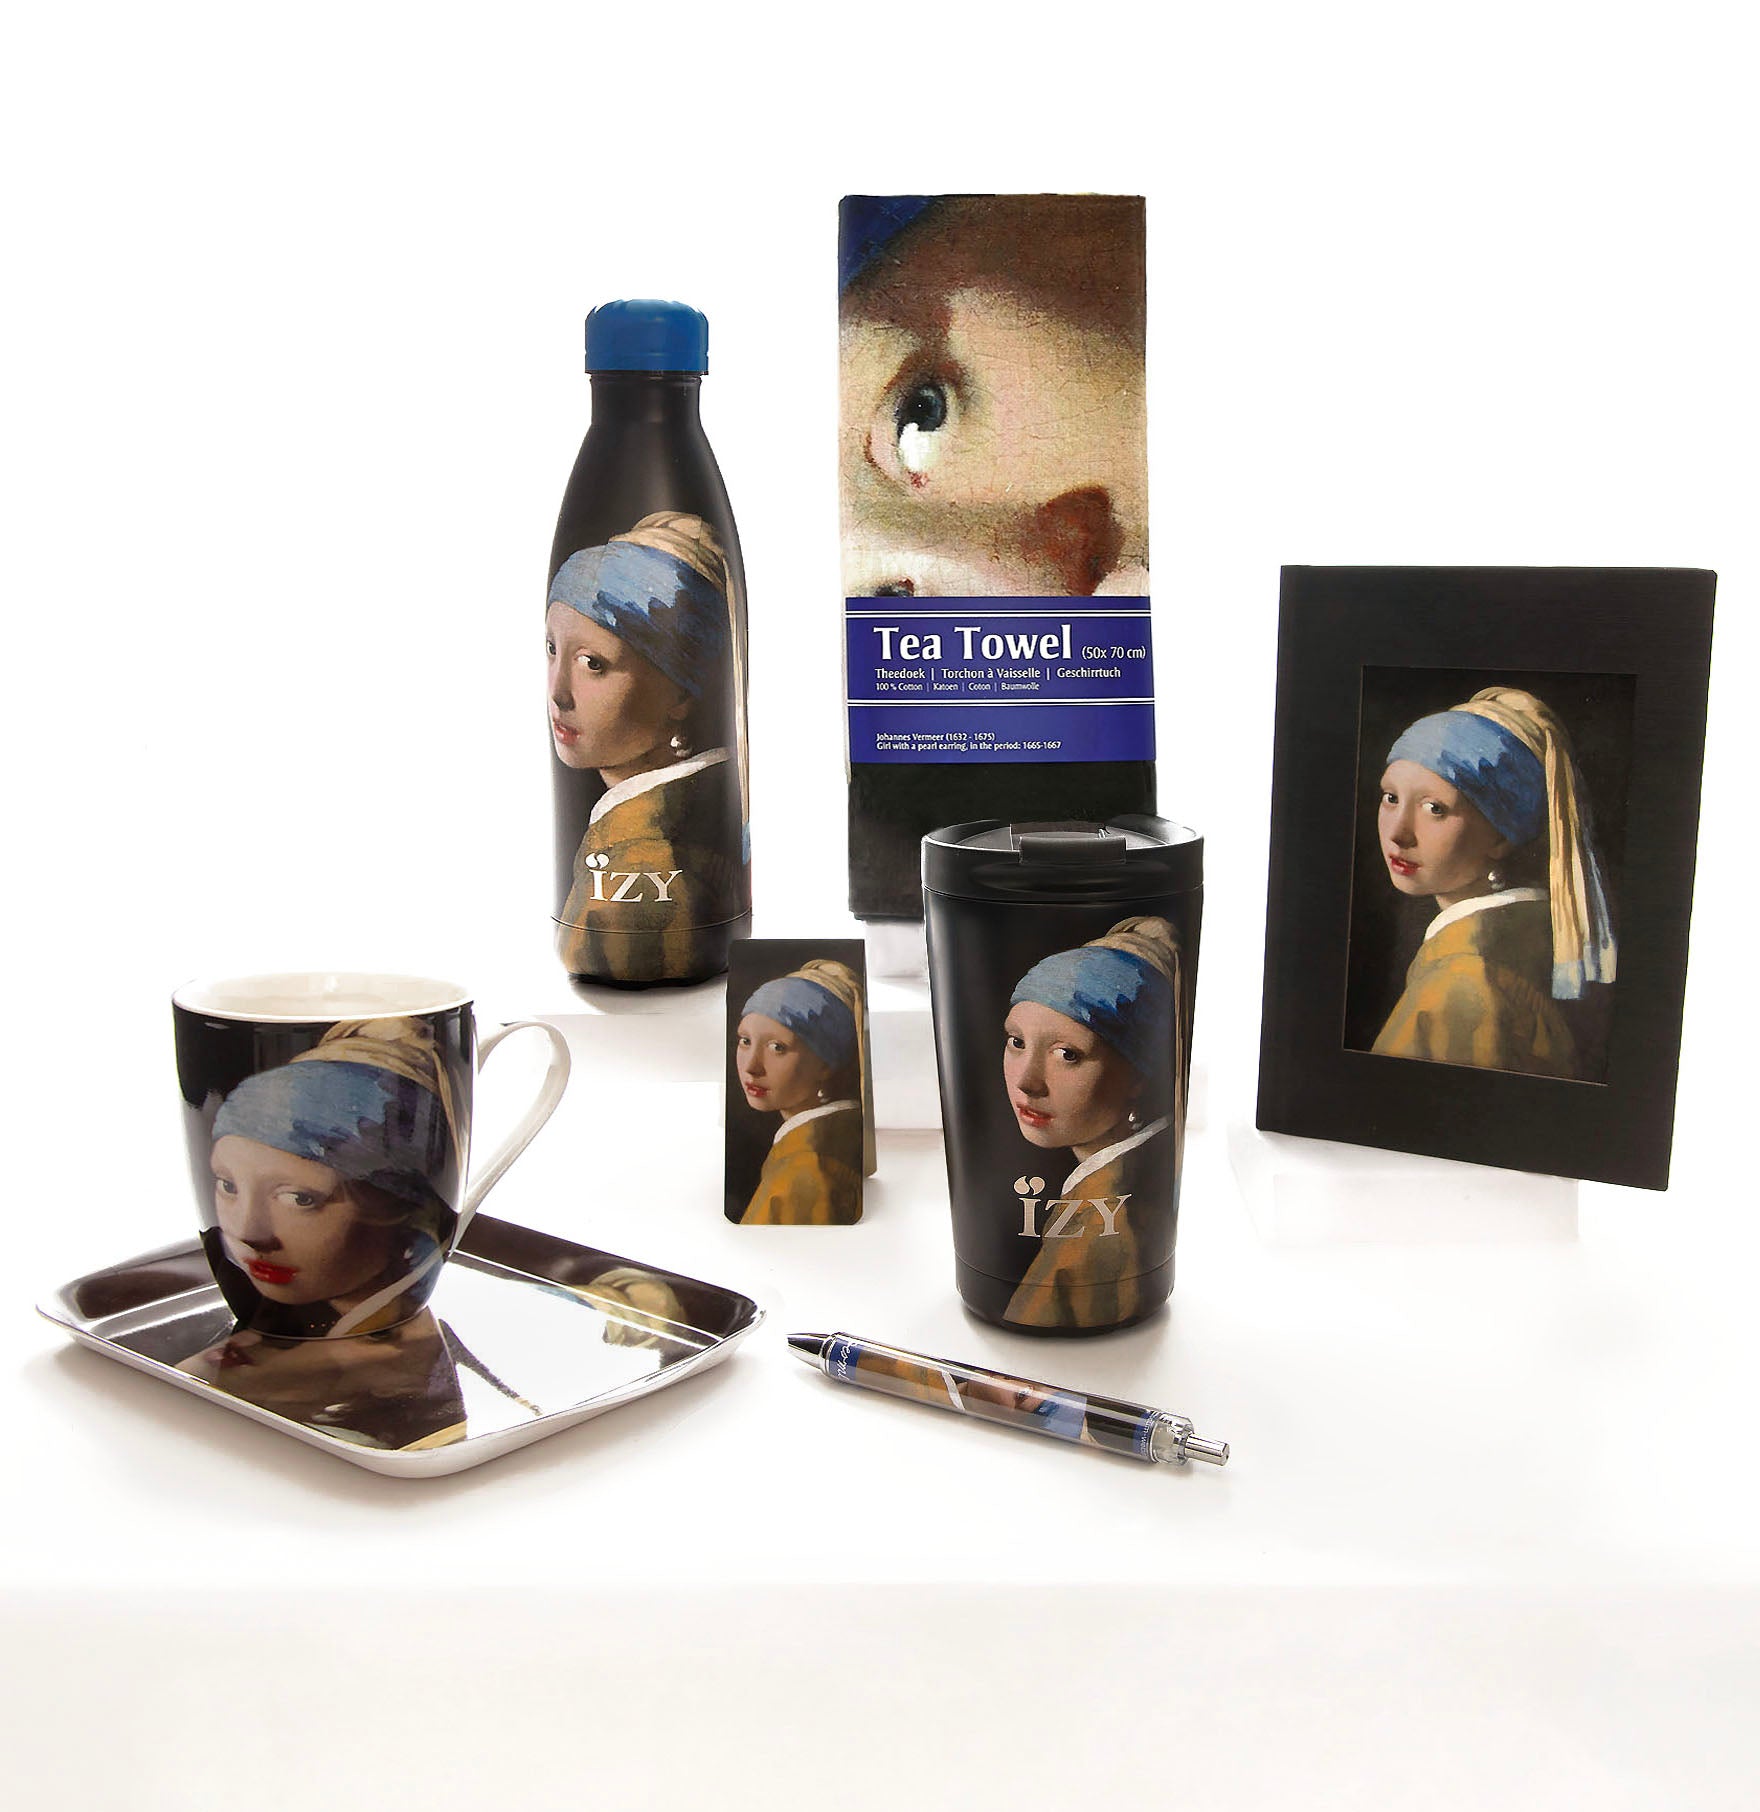 Shop Now! Holland's Mauritshuis Souvenir Gift Sets! 'Girl wit a Pearl Earring' Luxury Gift Set, Vermeer